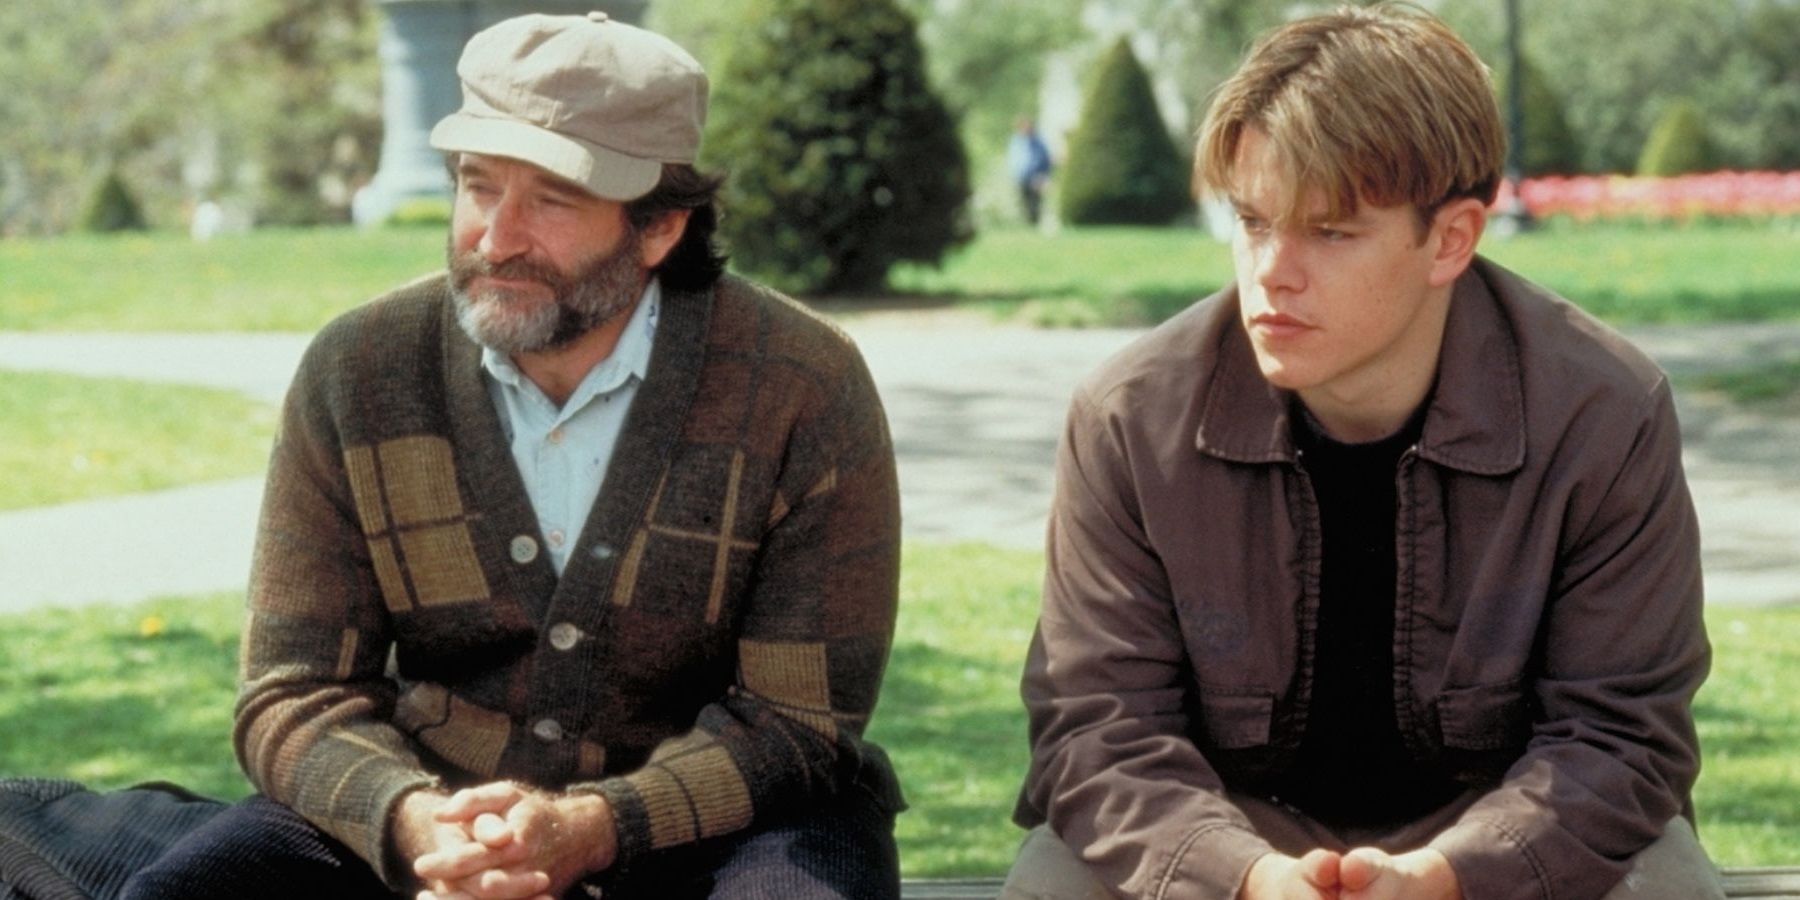 Matt Damon and Robin Williams on a park bench in Good Will Hunting